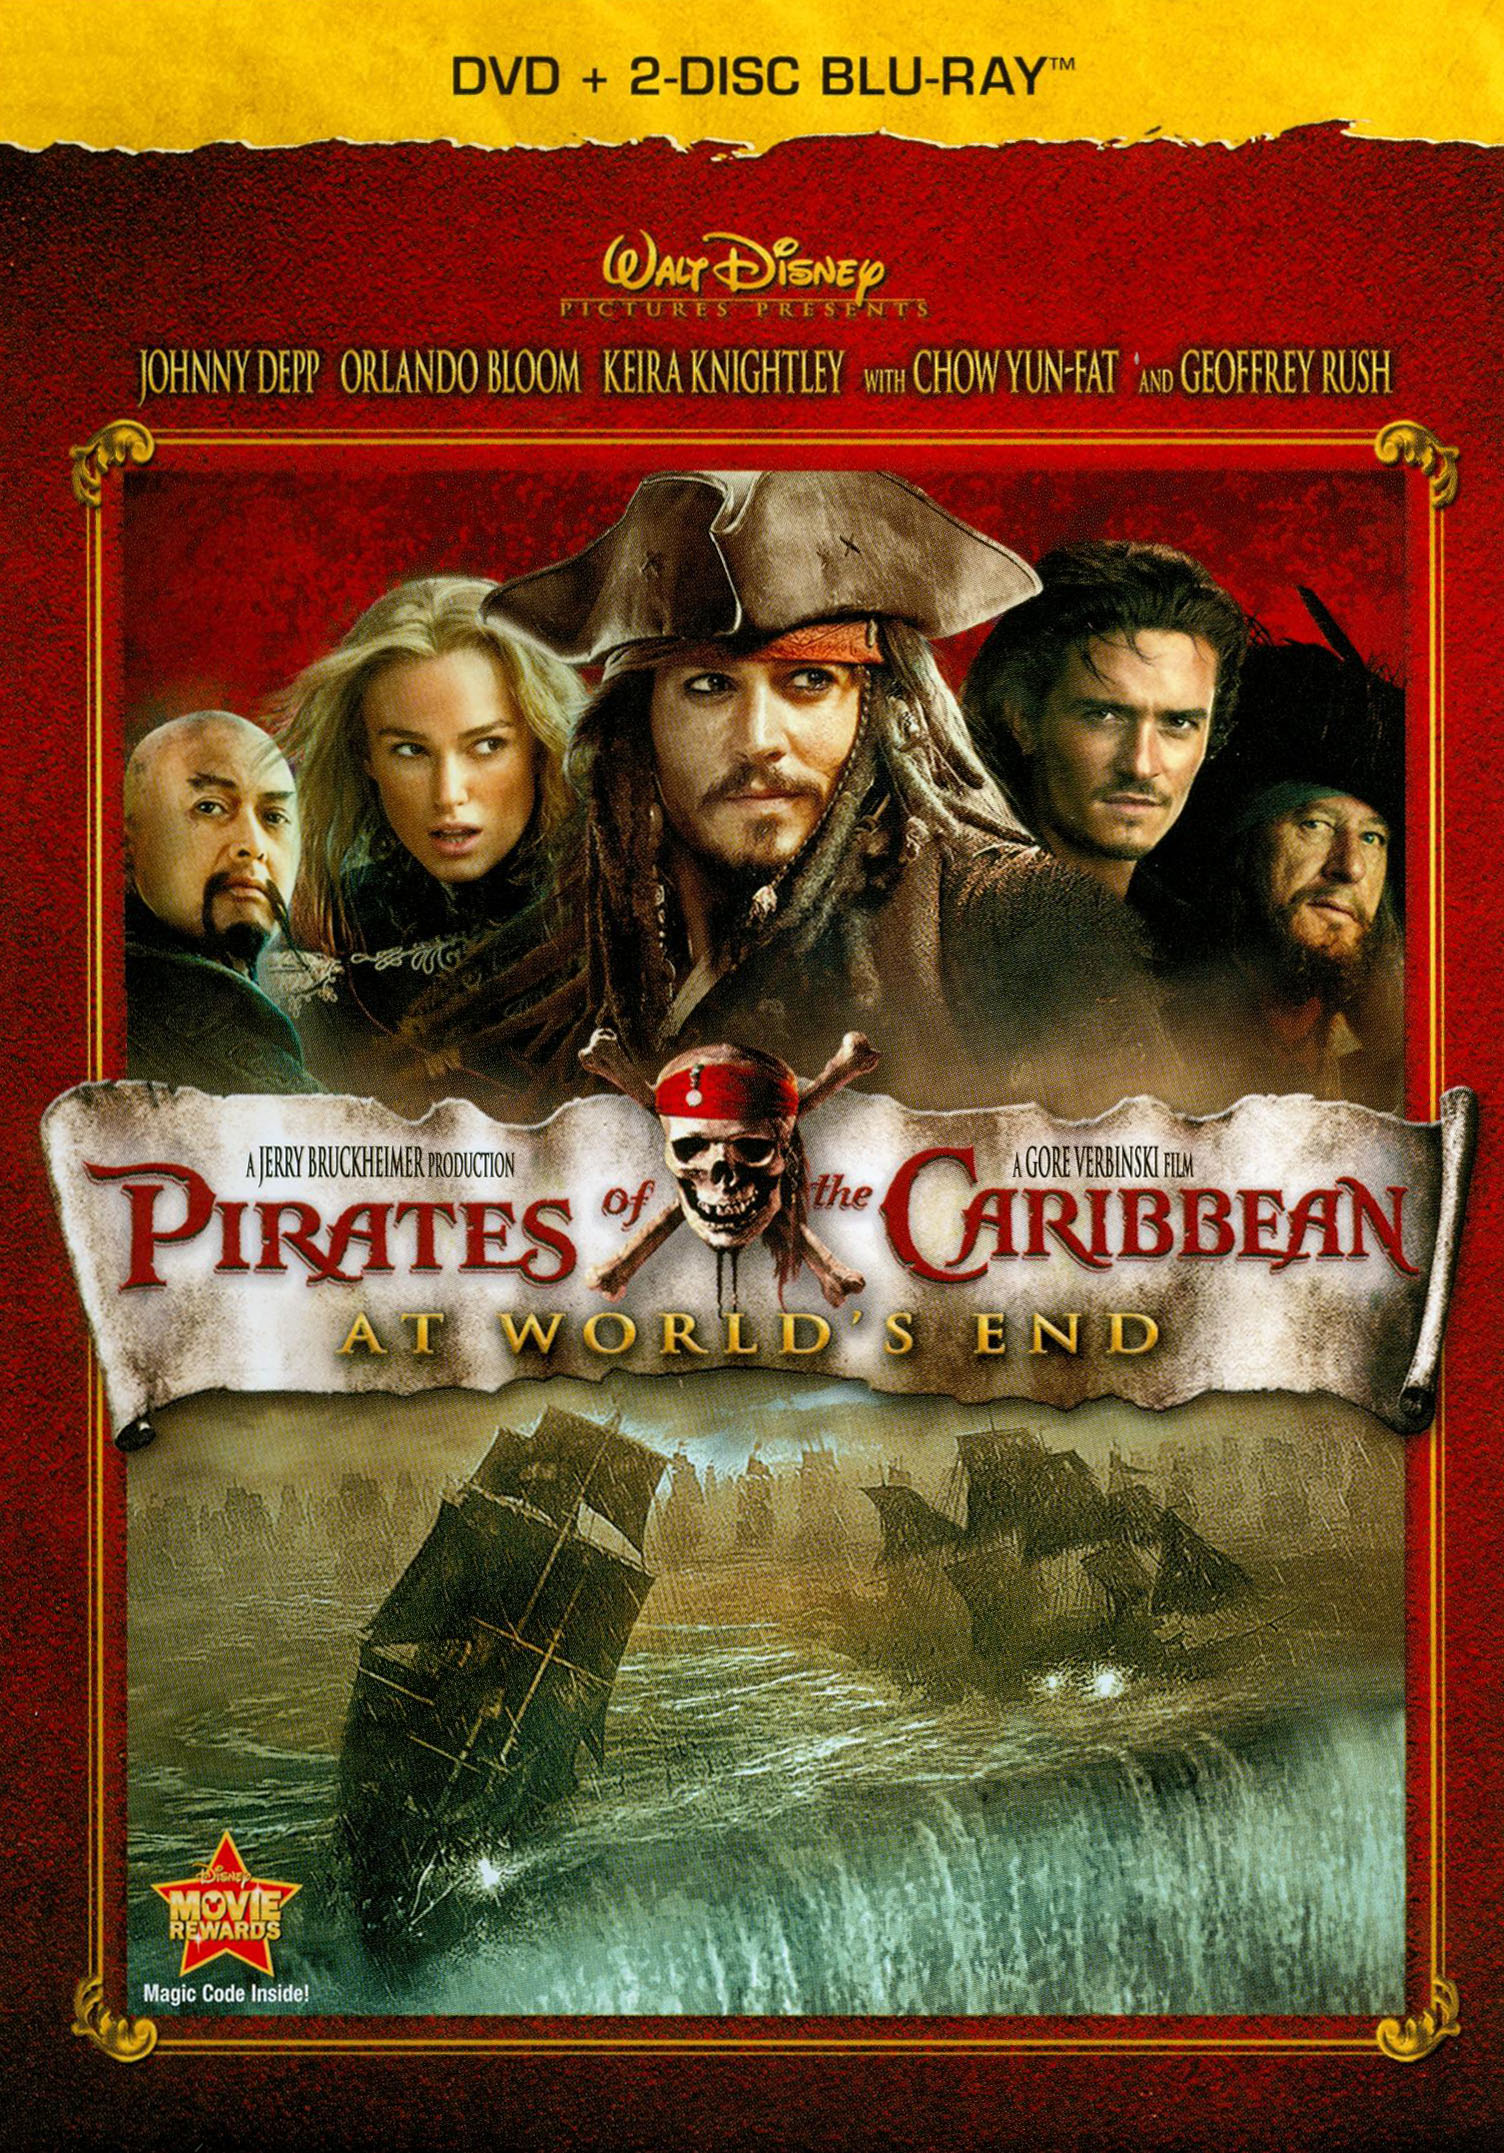 Pirates of the Caribbean: At World's End (DVD, 2007) - Like New  786936292992